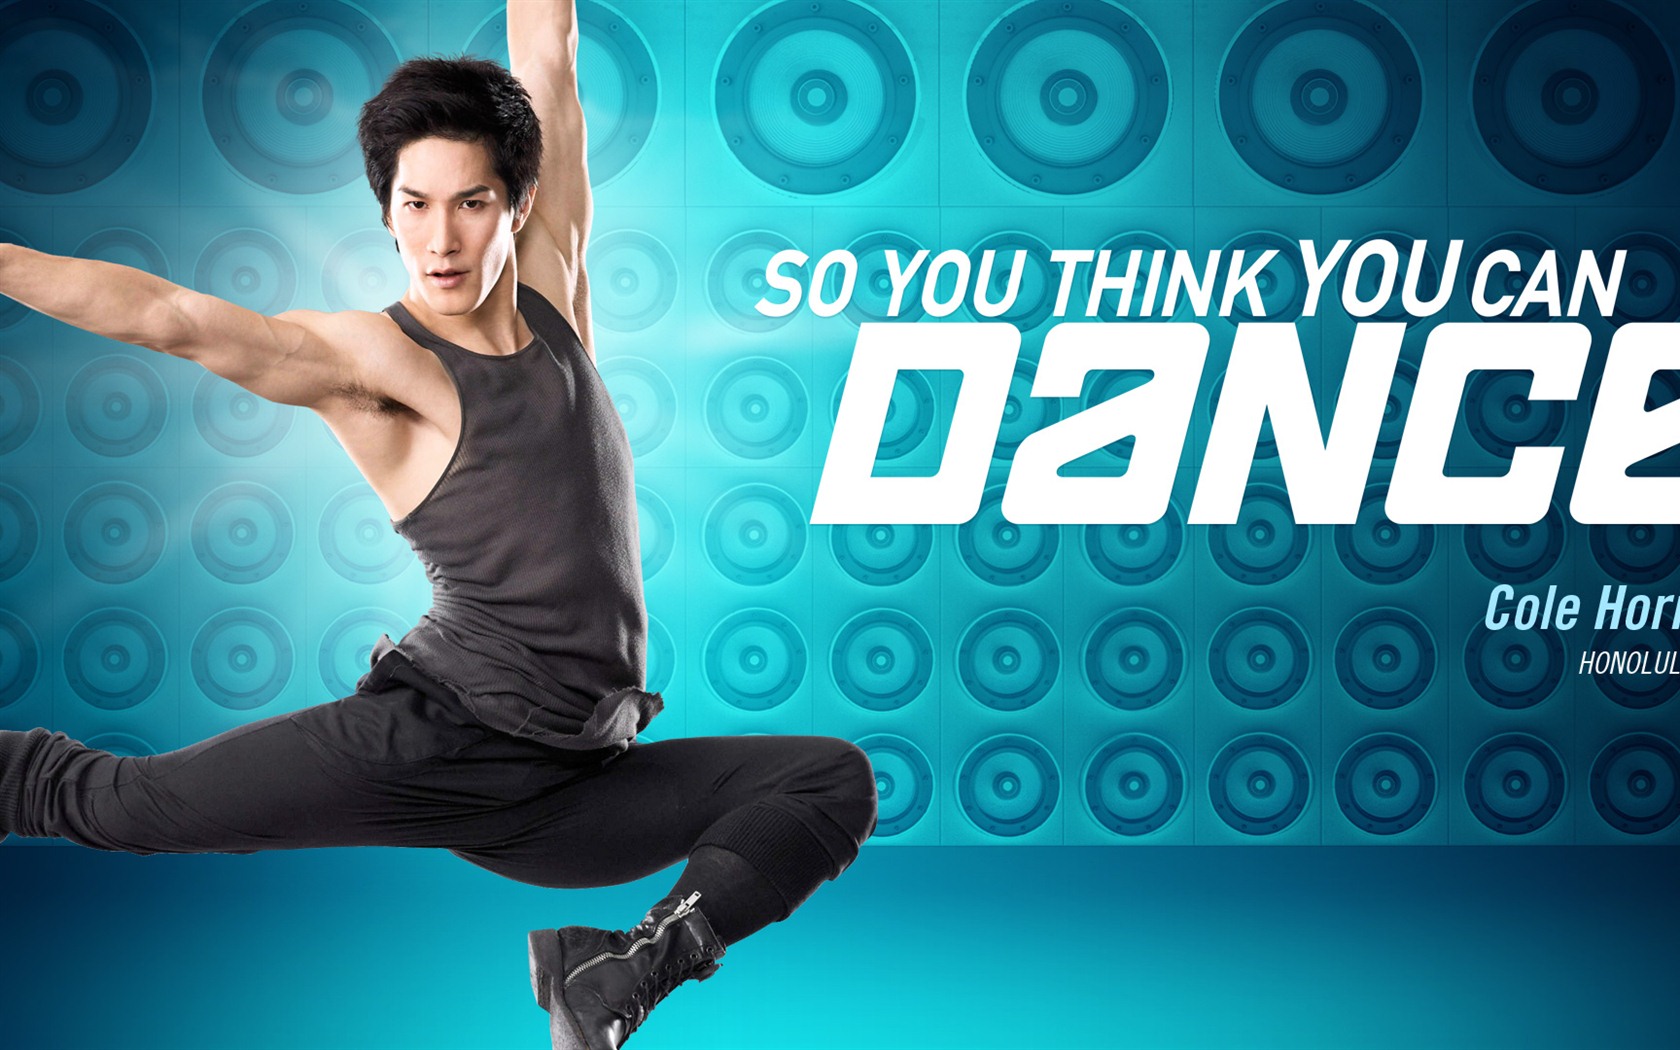 So You Think You Can Dance 舞林争霸 2012高清壁纸8 - 1680x1050